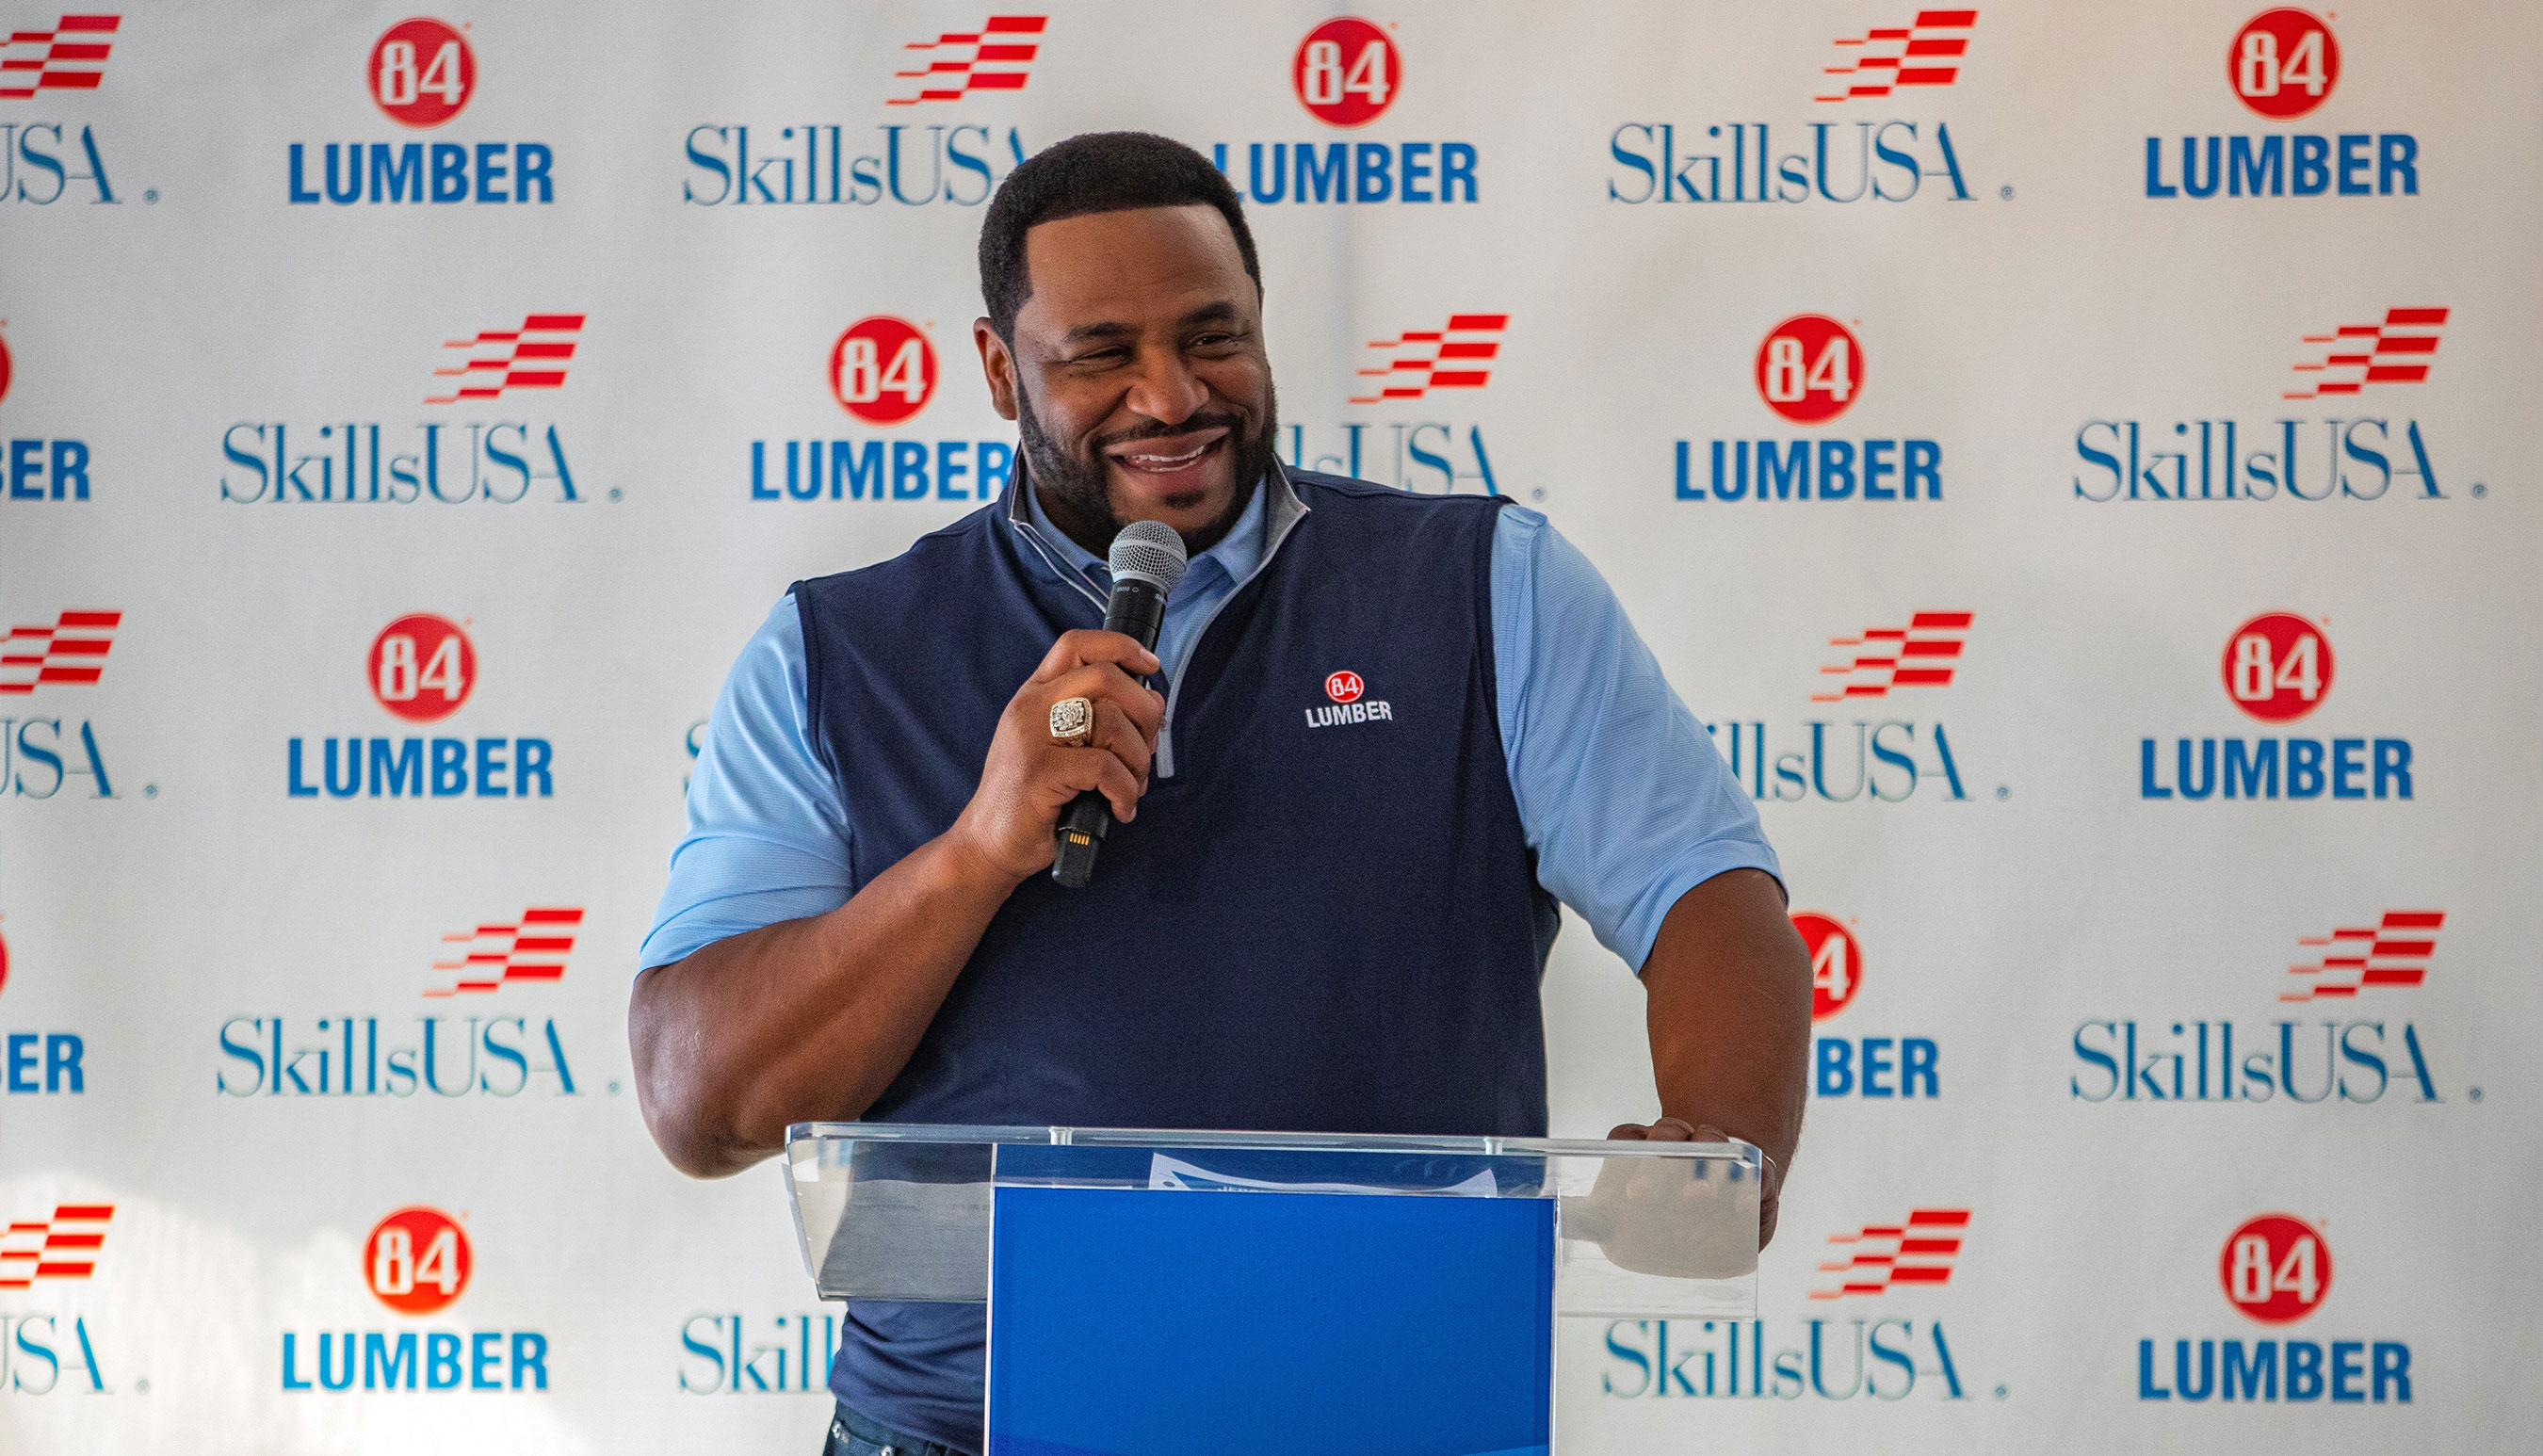 NFL Great Jerome Bettis Helps Recognizes High School Seniors Committing to Skilled Trades during SkillsUSA National Signing Day